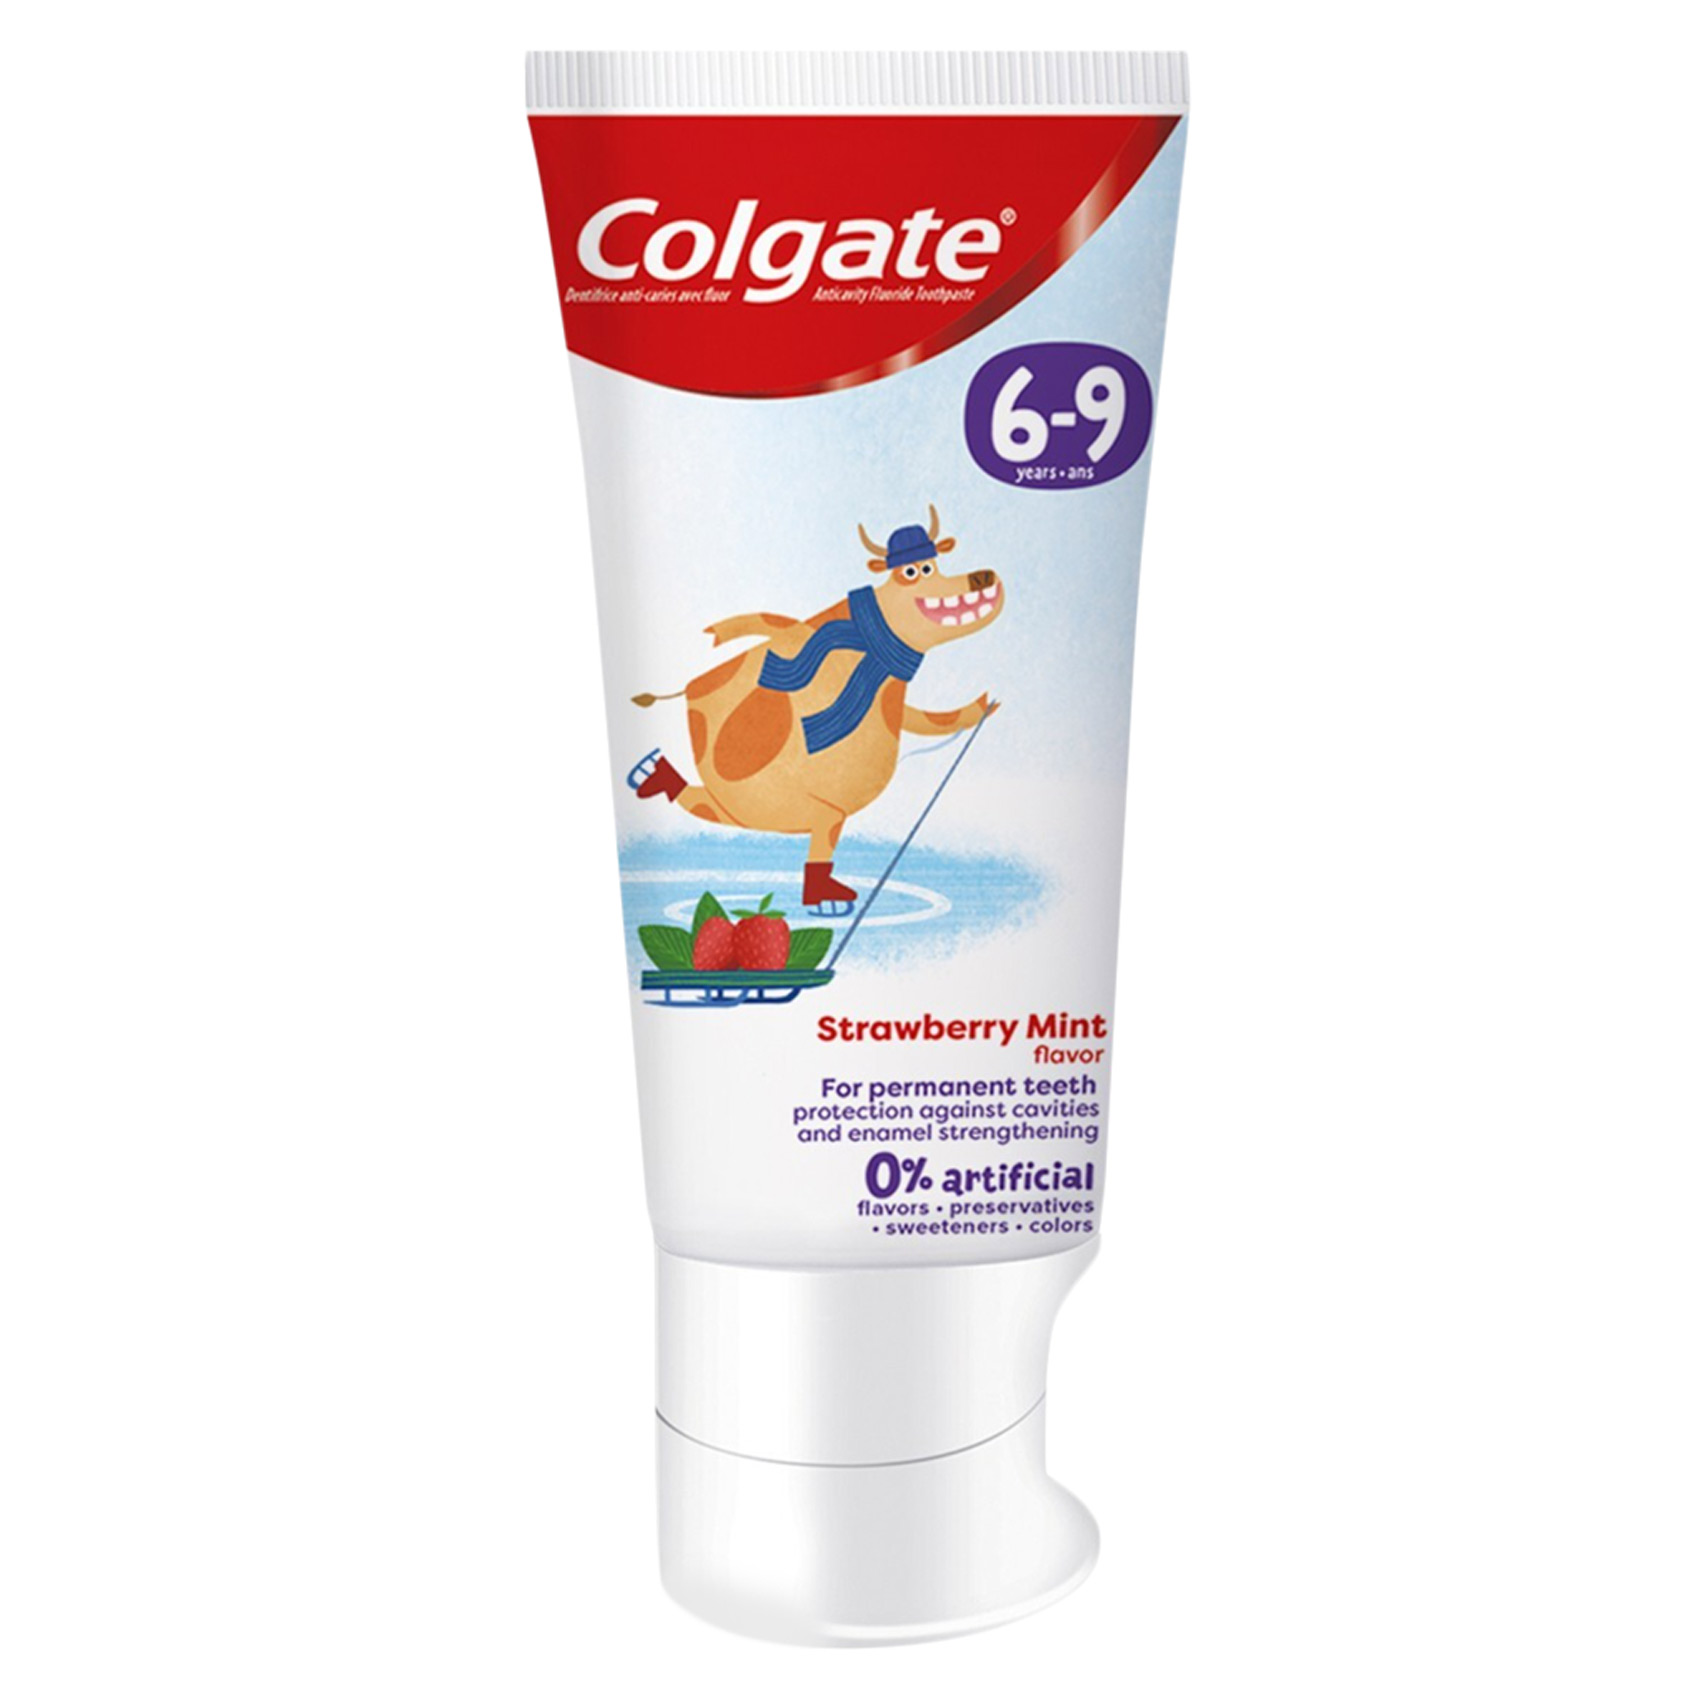 Colgate 0 % Artificial Strawberry Mint Flavour Fluoride Free Kids Toothpaste For 6 To 9 Years 60ml